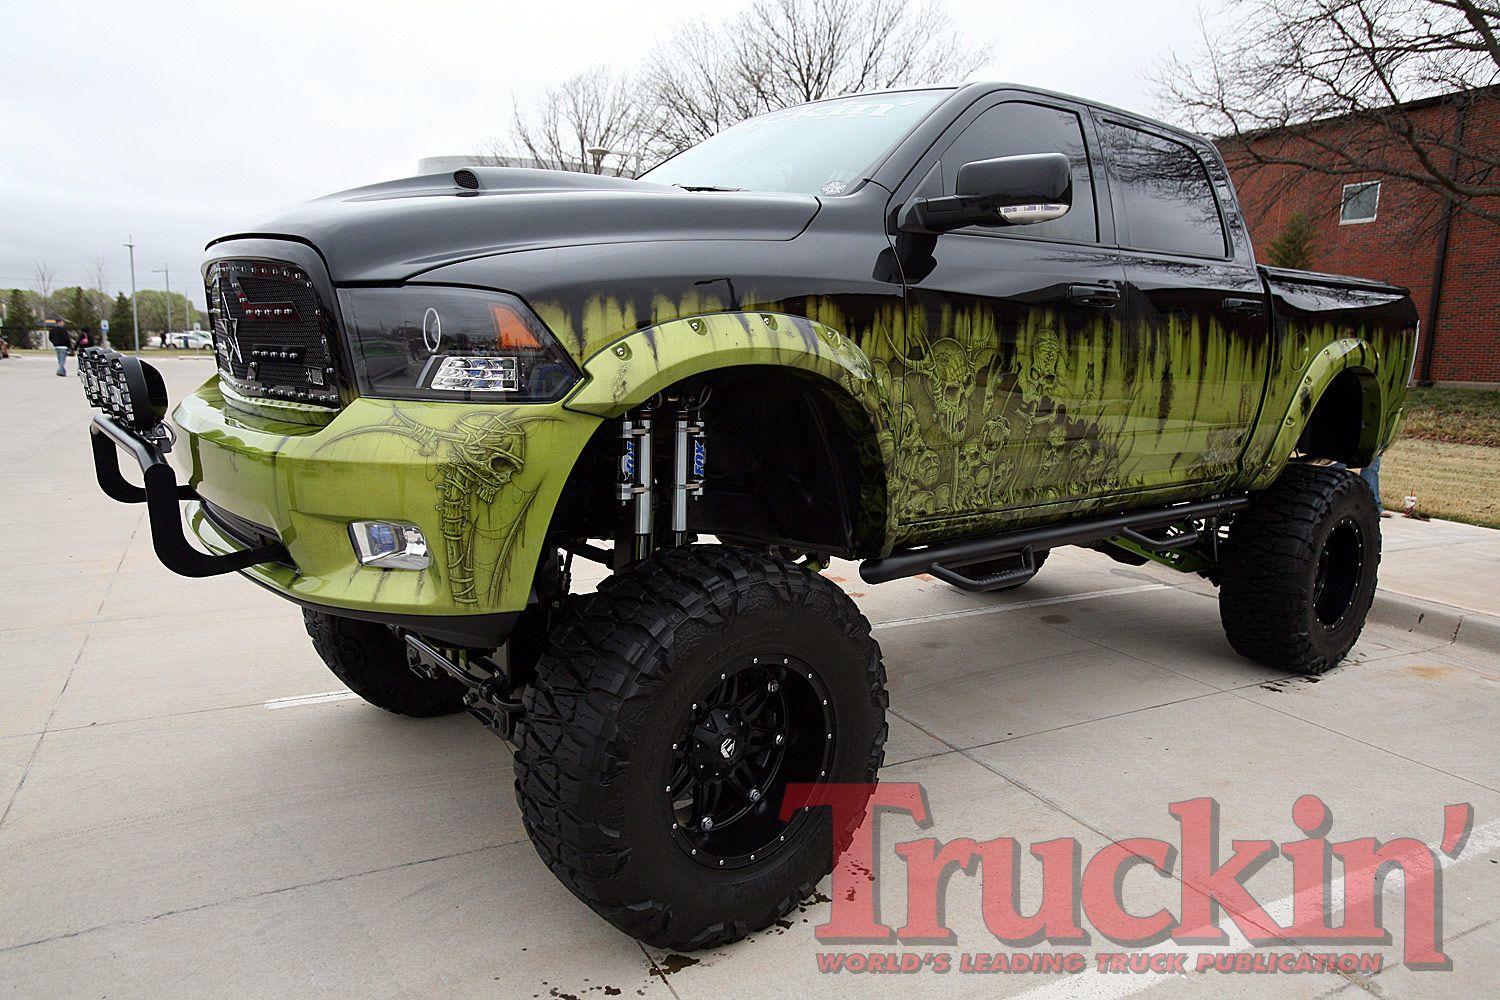 Dodge Ram two tone black and green lifted truck. Mean trucks